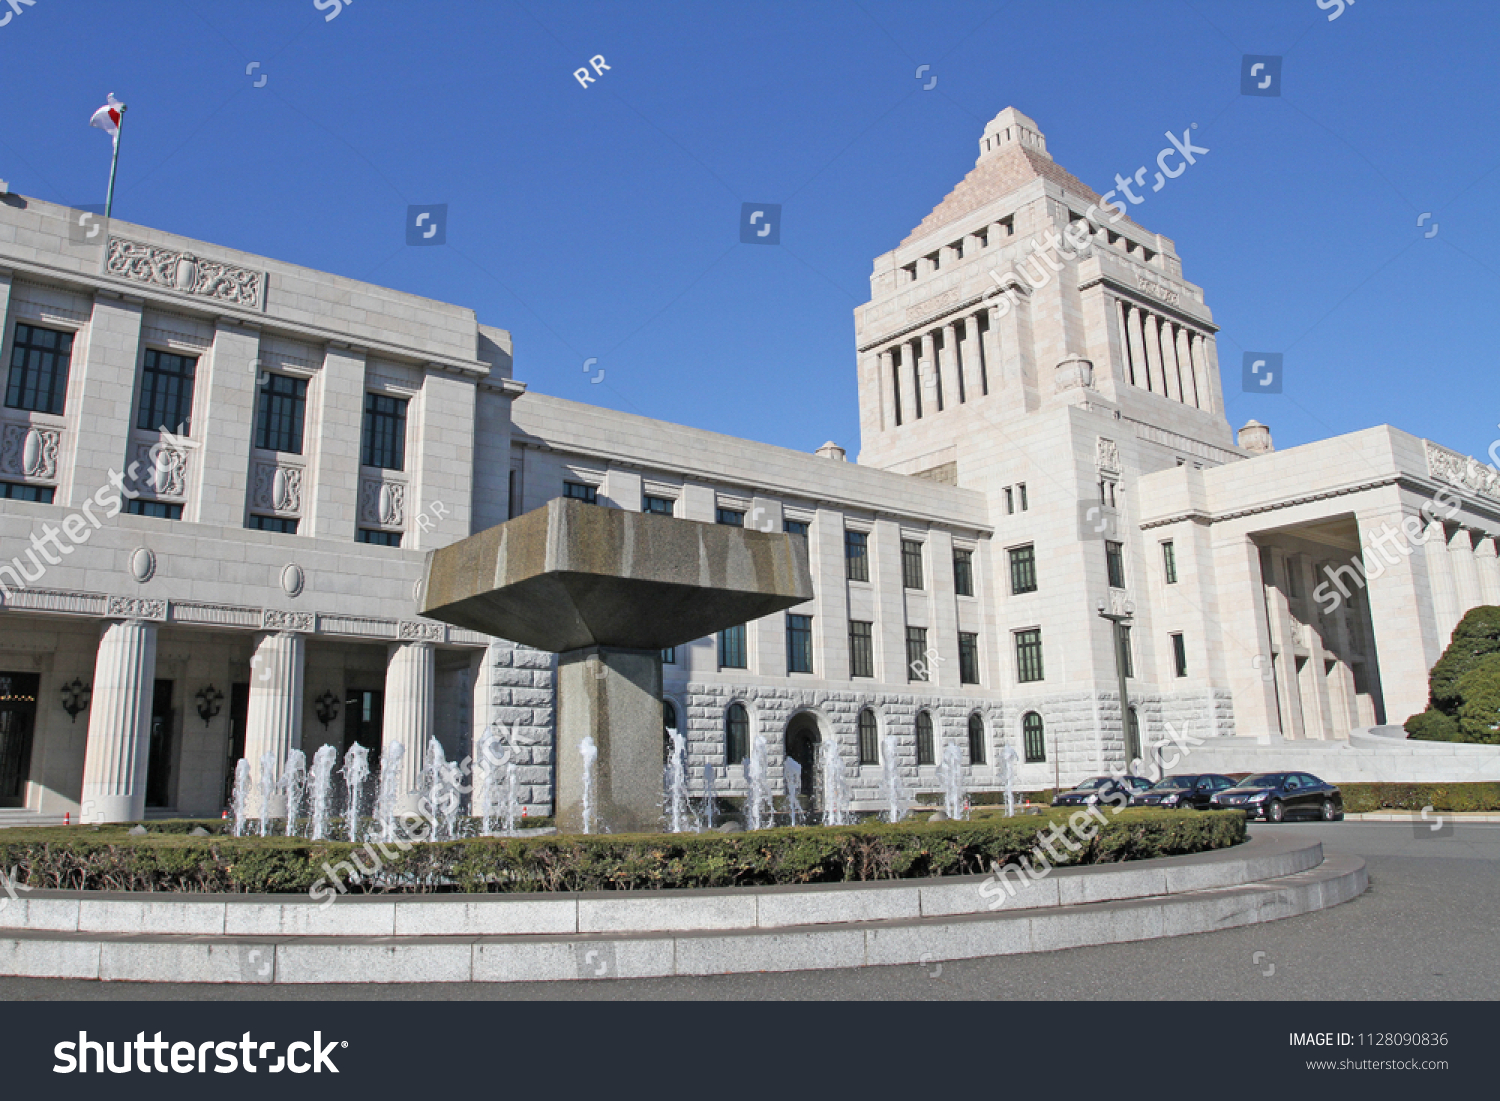 National Diet Building Which Center Politics の写真素材 今すぐ編集